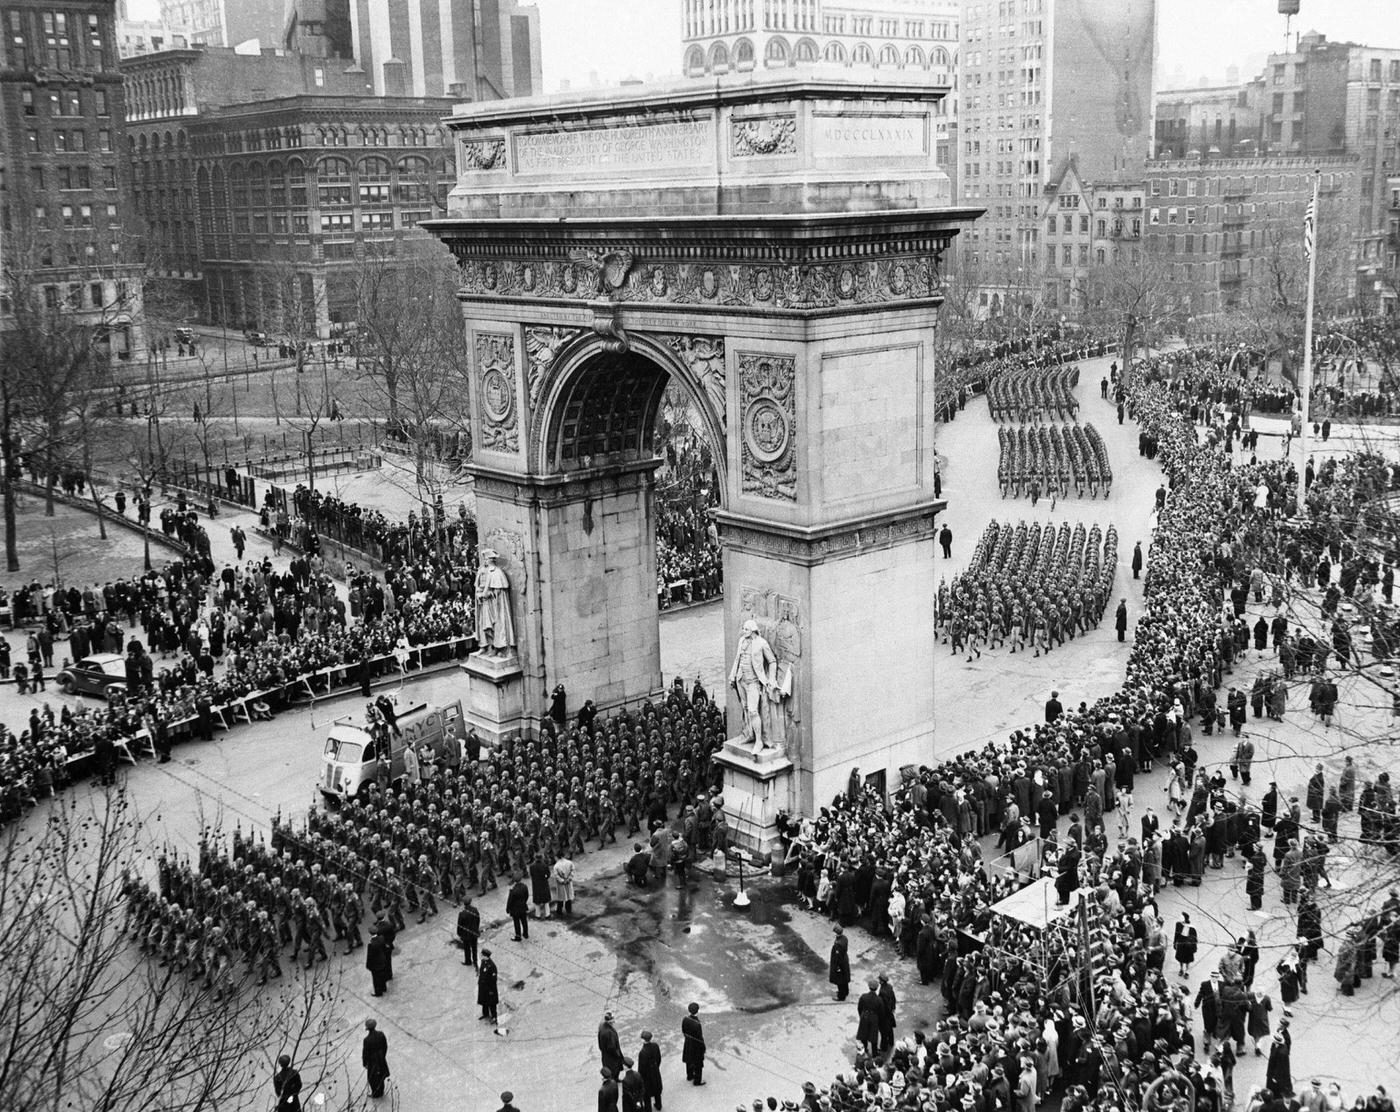 Paratroopers Of The 82Nd Airborne Division Marching In Victory Parade Through Washington Square Arch, Manhattan, 1945